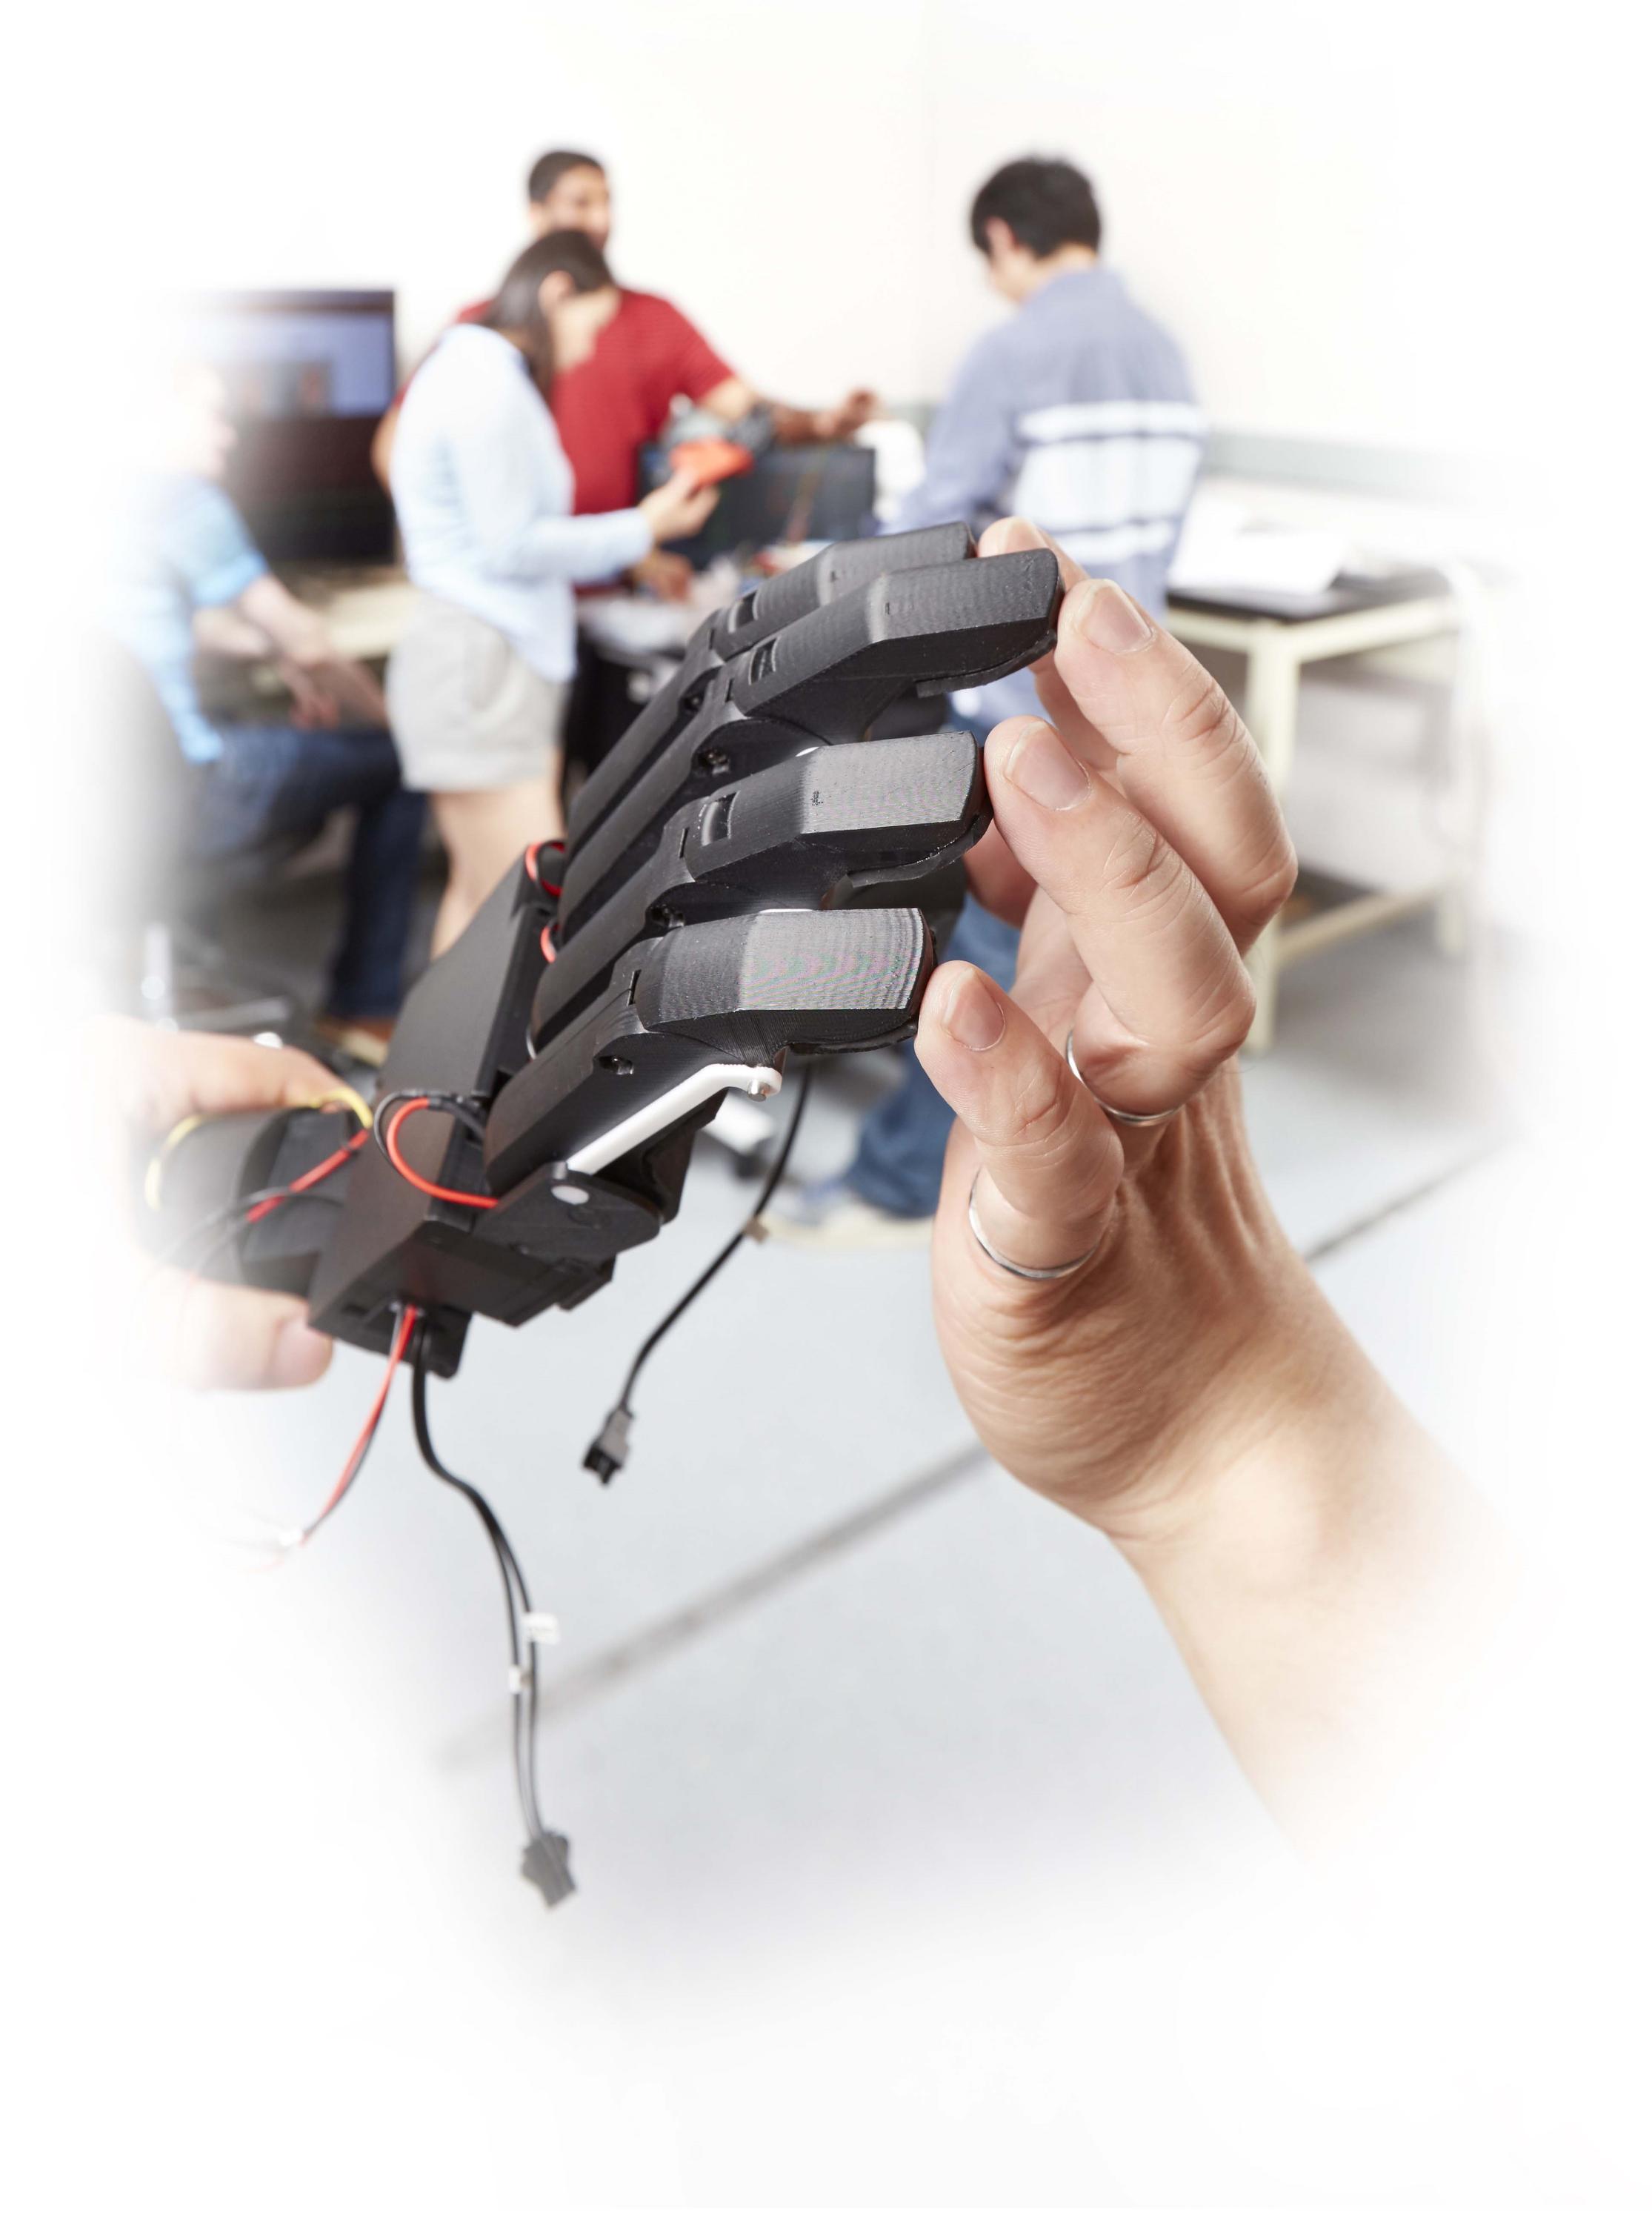 Robotic hand with real hand